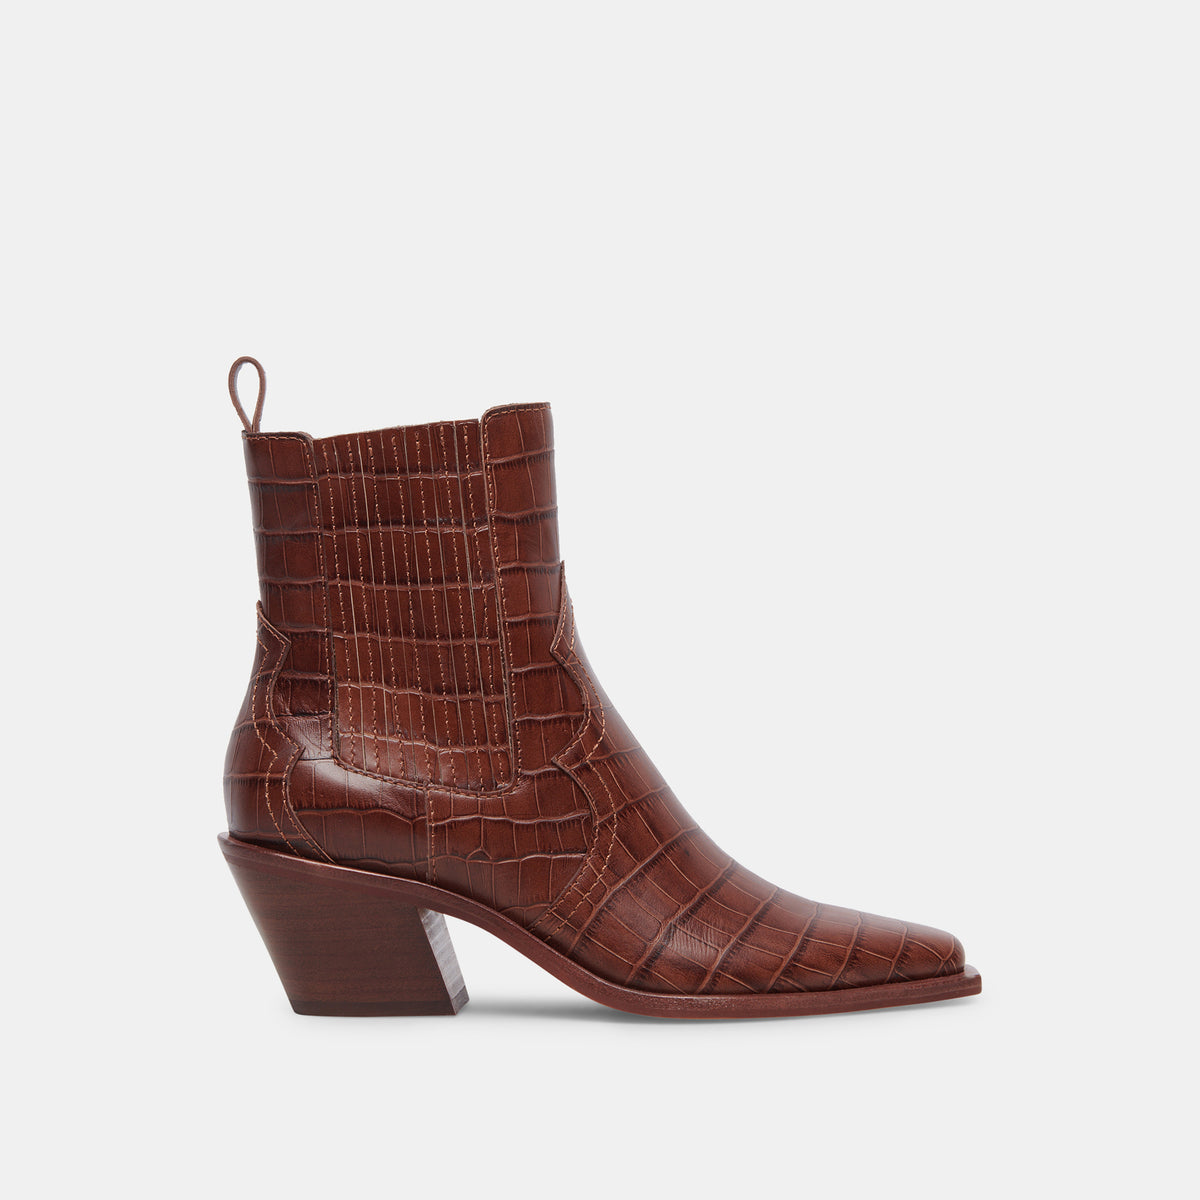 Senna Booties Walnut Embossed Leather | Women's Leather Cowboy Boots ...